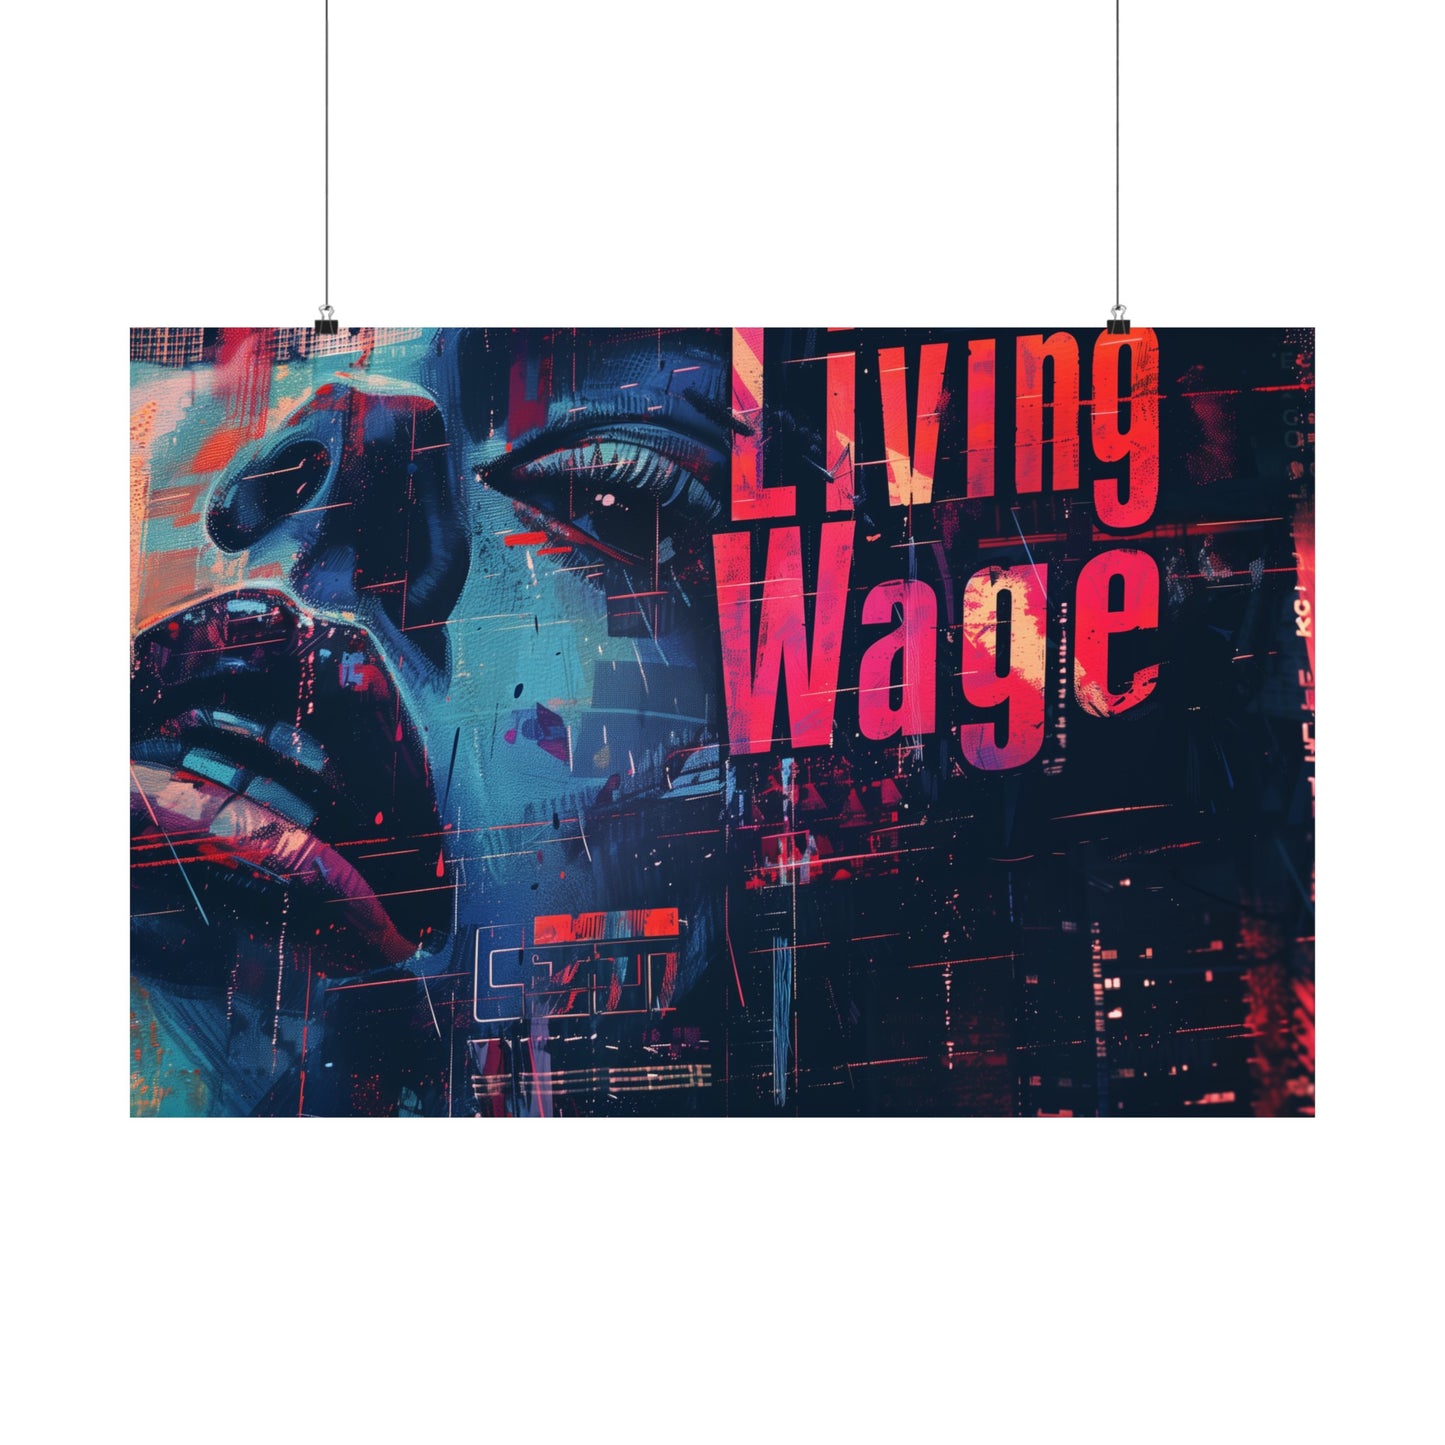 Living Wage! Demand Respect! Gorgeous Poster Cyberpunk Style Activist Art Piece Cool and Engaging! Worker Labor Union Rights!